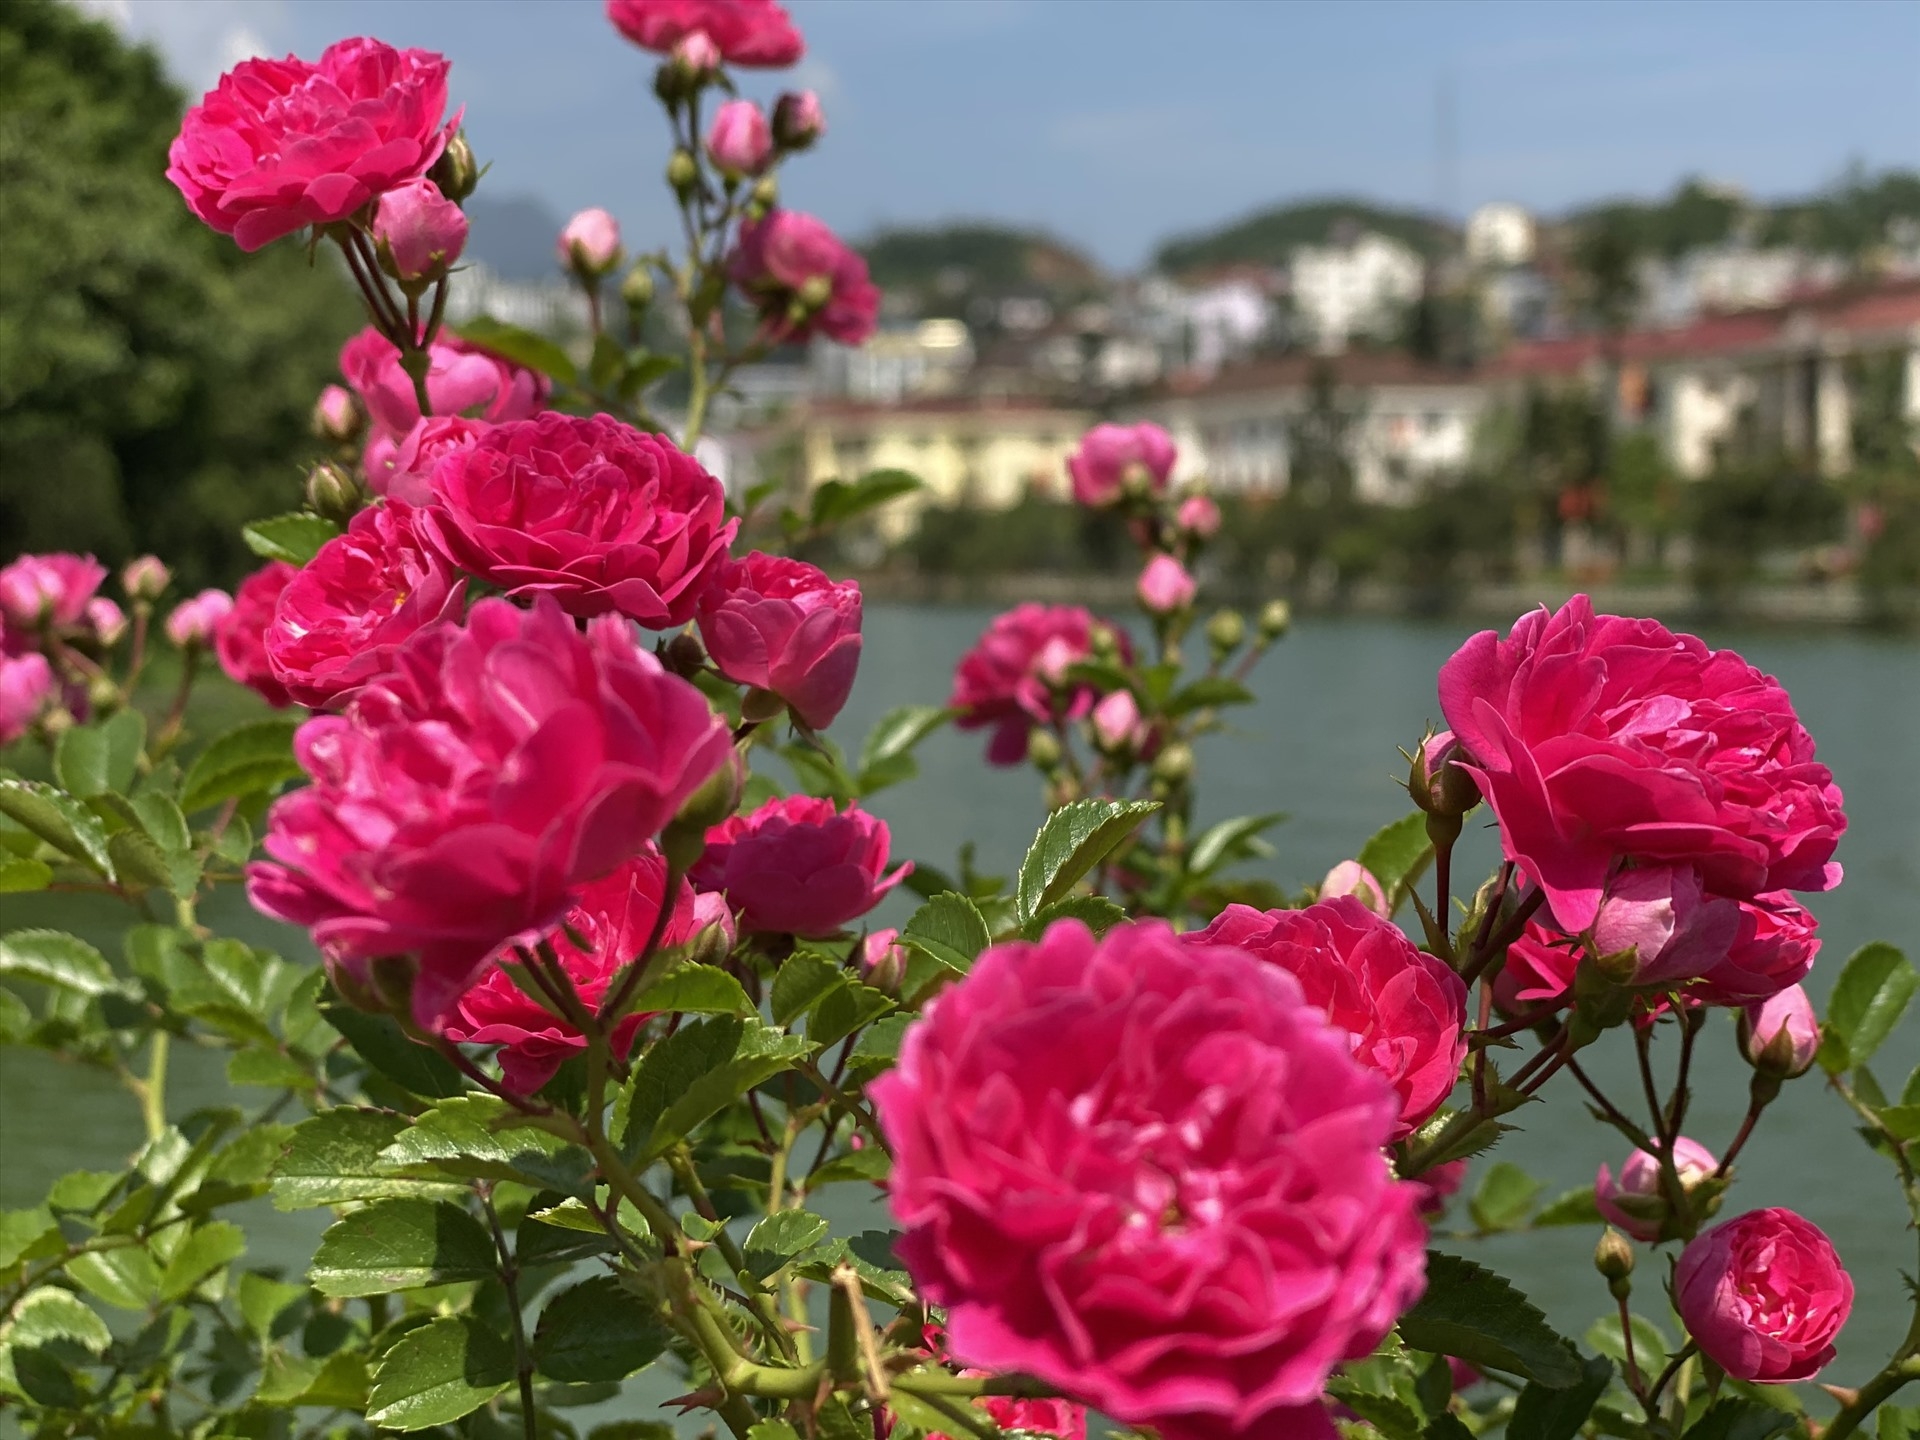 Sapa S Rose Valley Recognised As Largest One In Vietnam Vietnam Times